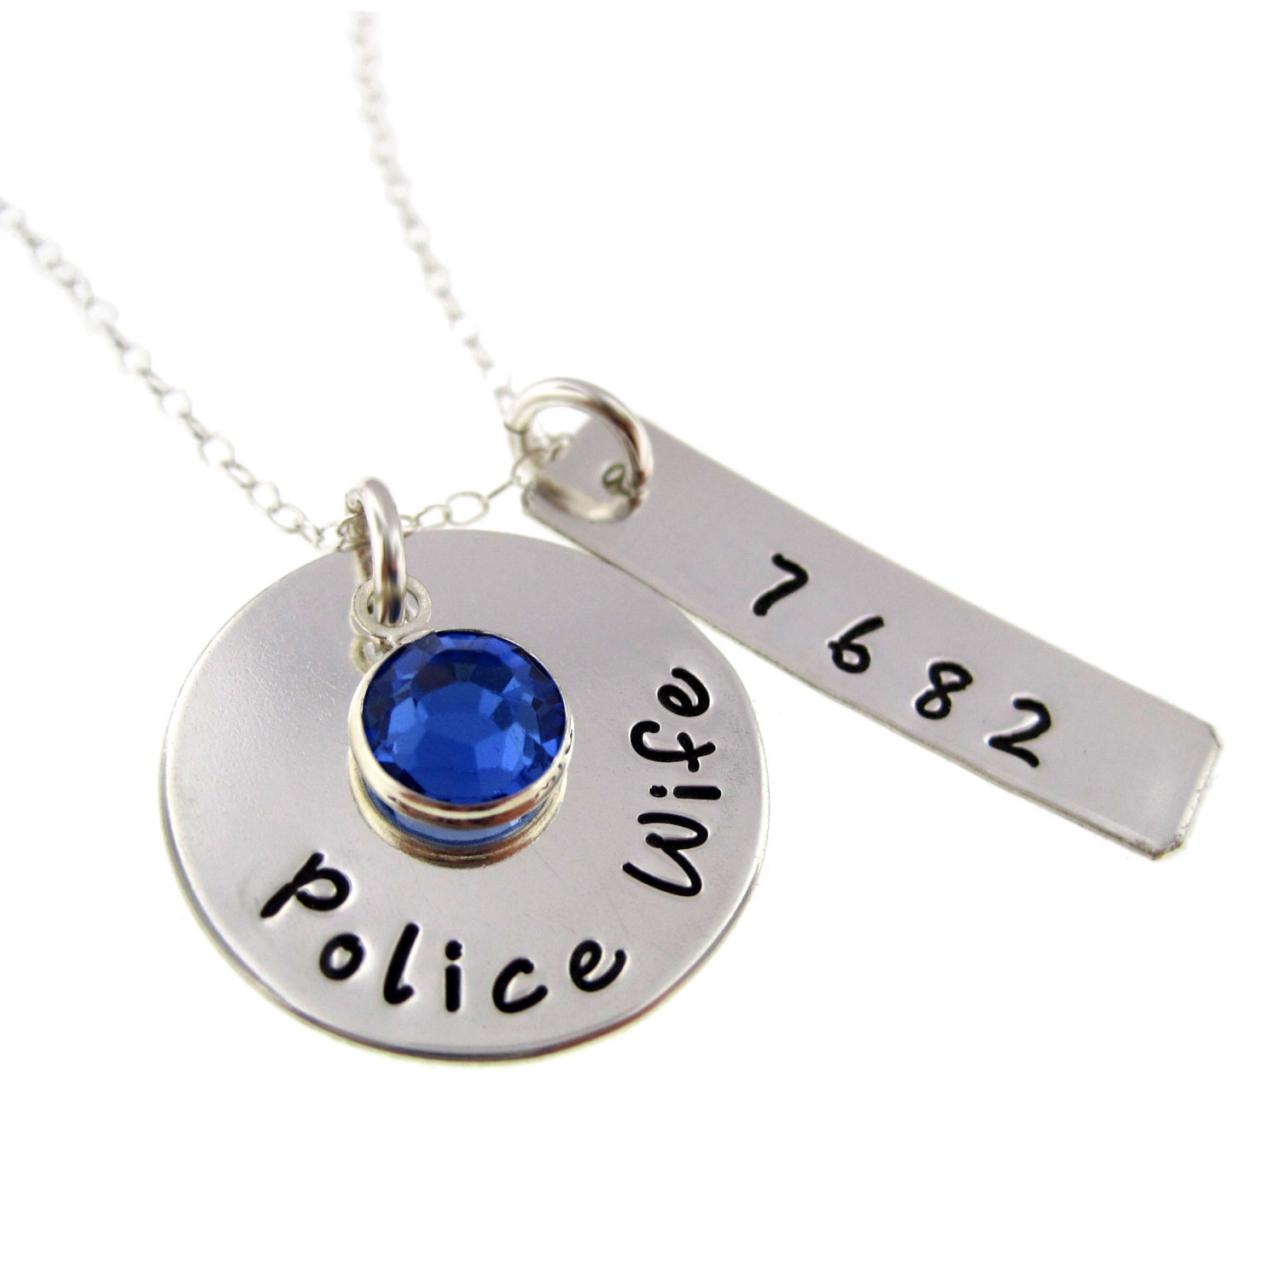 Police Wife / Army Wife/ Deputy Wife / Sterling Silver Hand Stamped Necklace With Freshwater Pearl